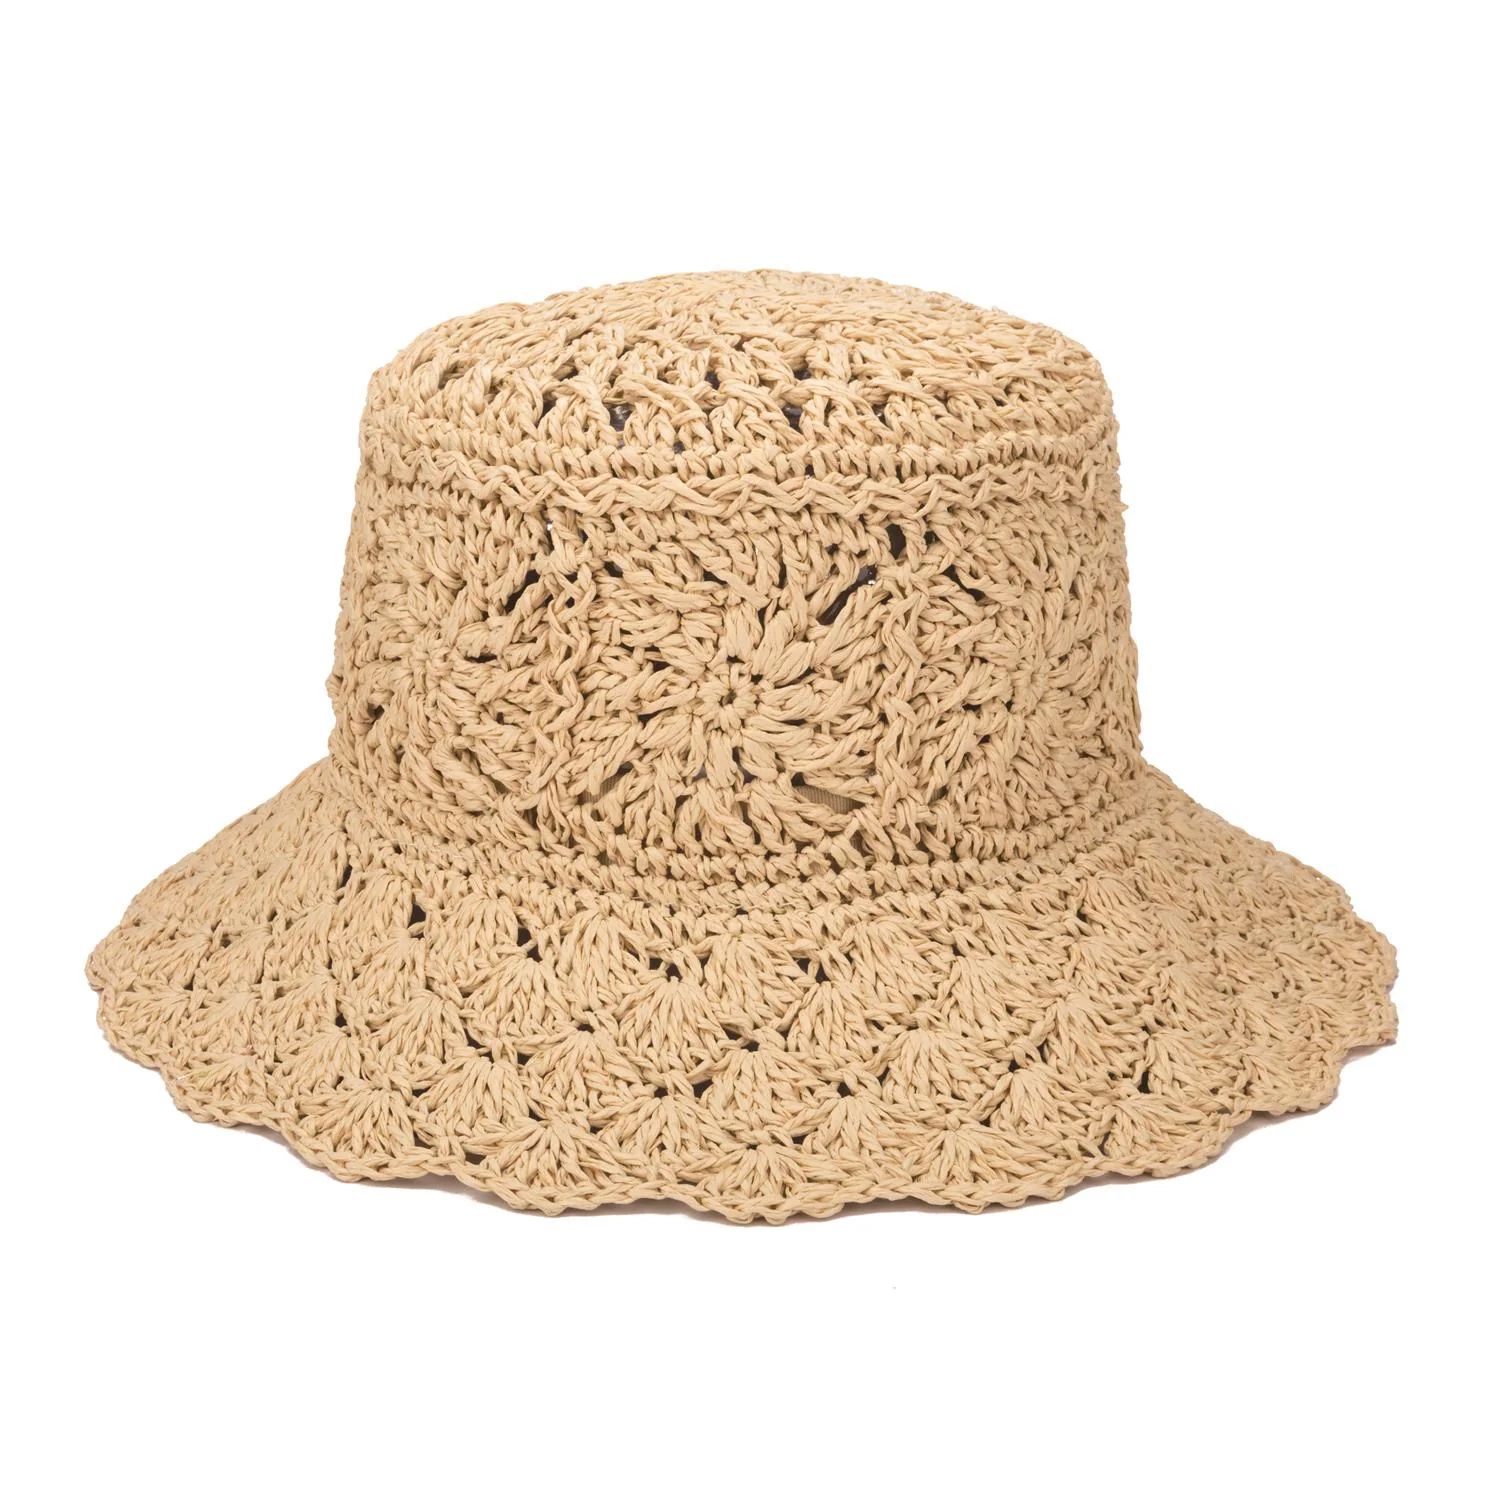 San Diego Hat Company Hobo Bucket Solid Hand Crochet Bucket Hat in Natural Lord & Taylor | Lord & Taylor